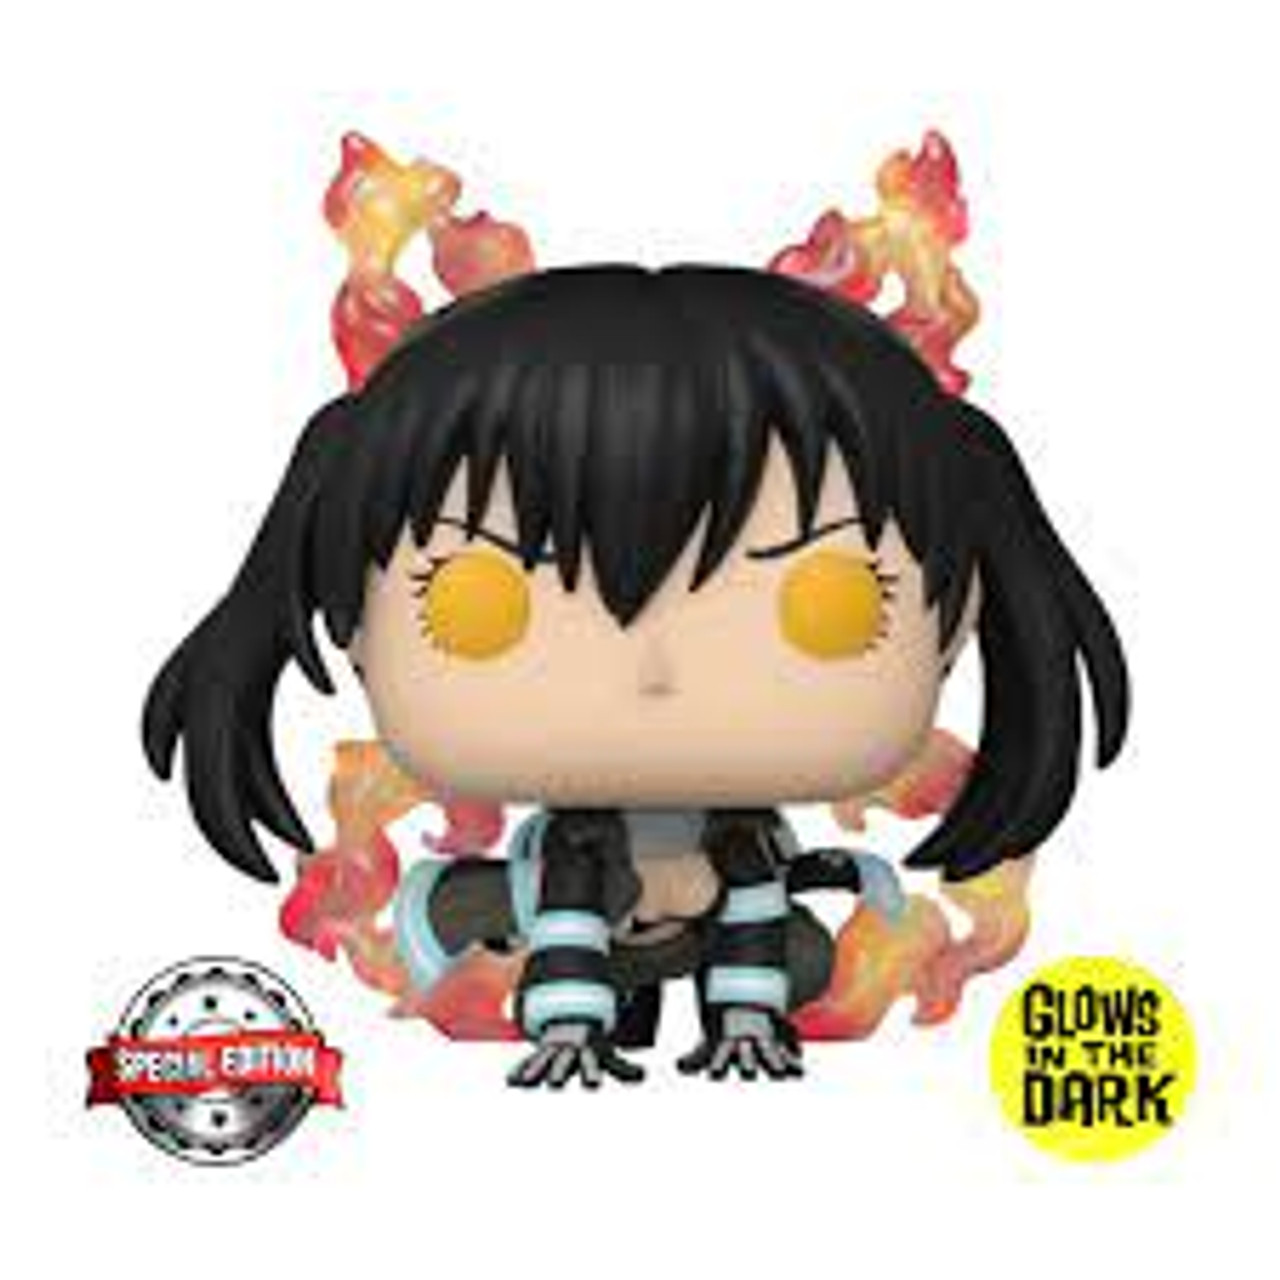 Funko Turns Up the Heat With Their New Fire Force Pop Vinyls